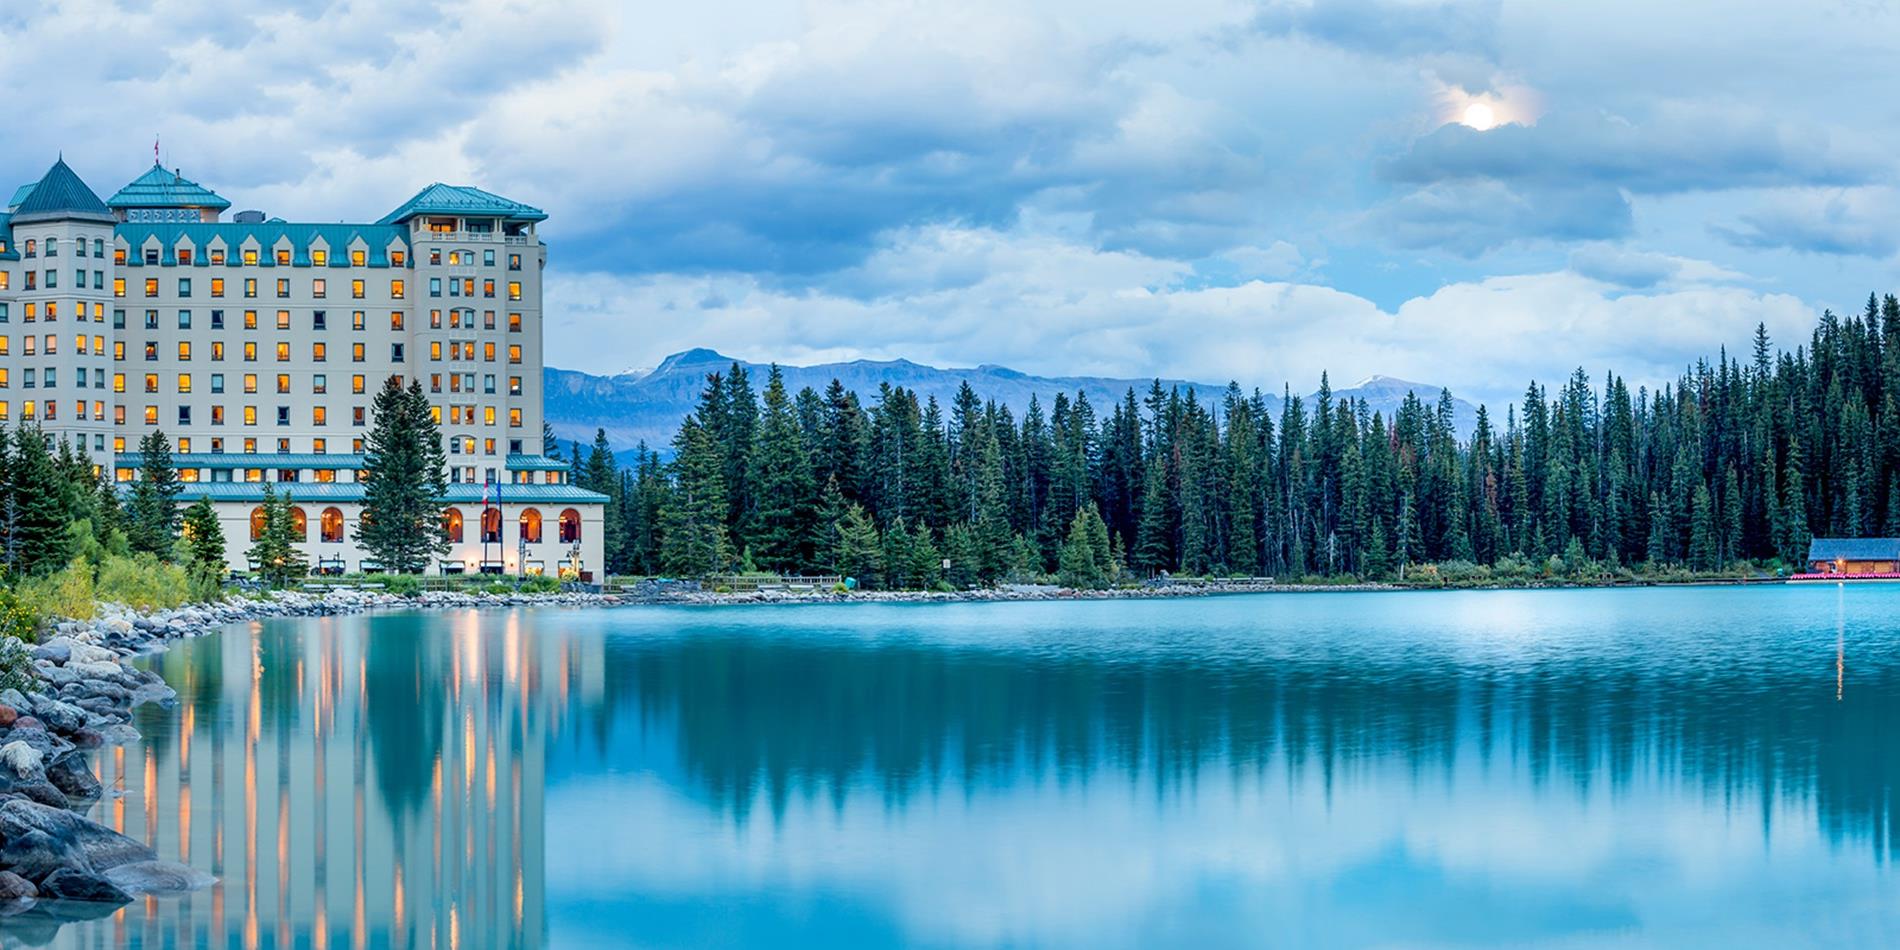 Fairmont Lake Louise hotel with reflection in lake at dusk